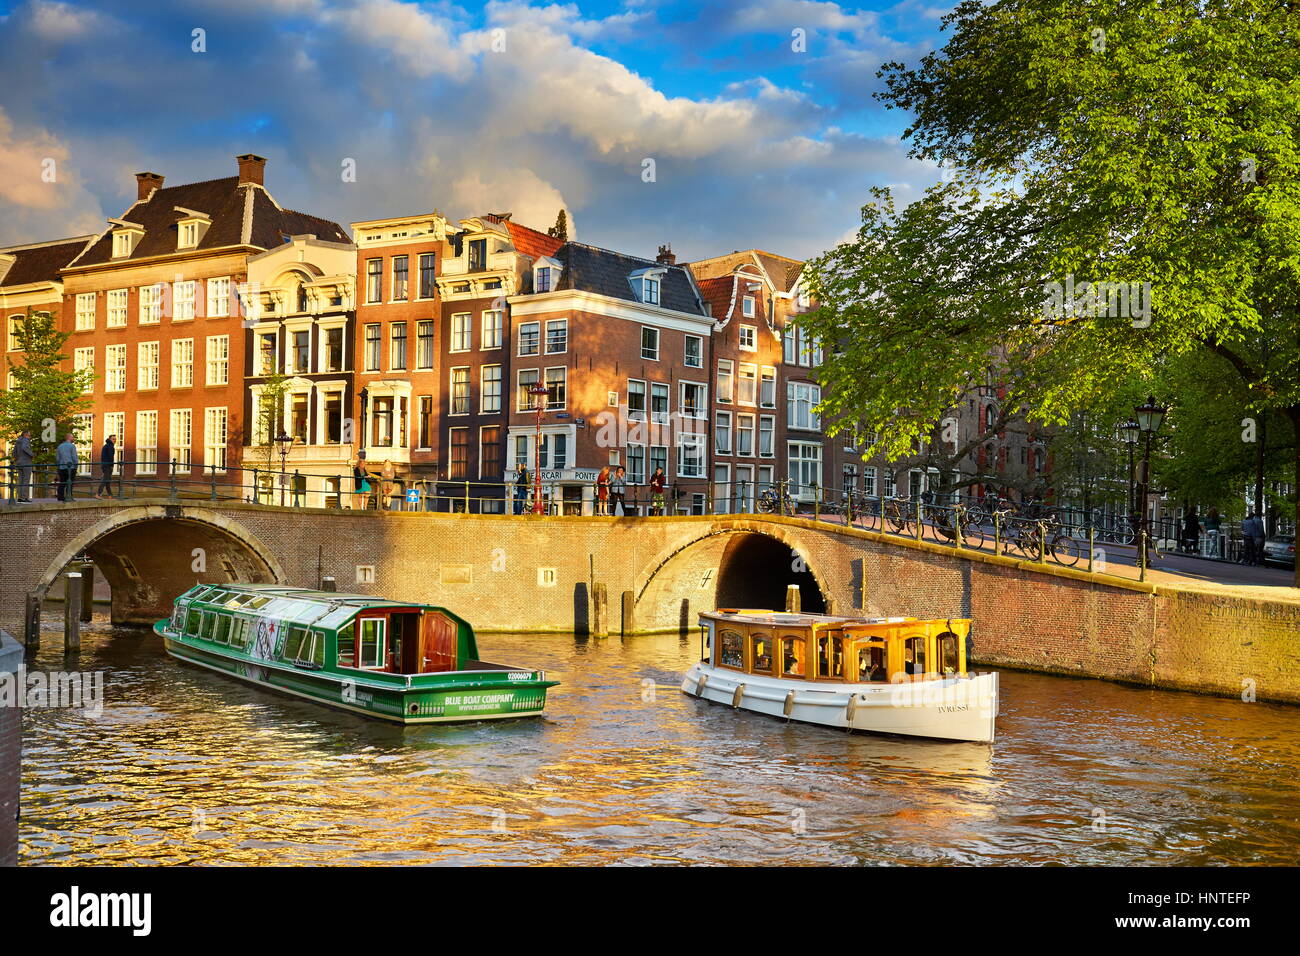 Boats on Amsterdam Canal, Holland, Netherlands Stock Photo